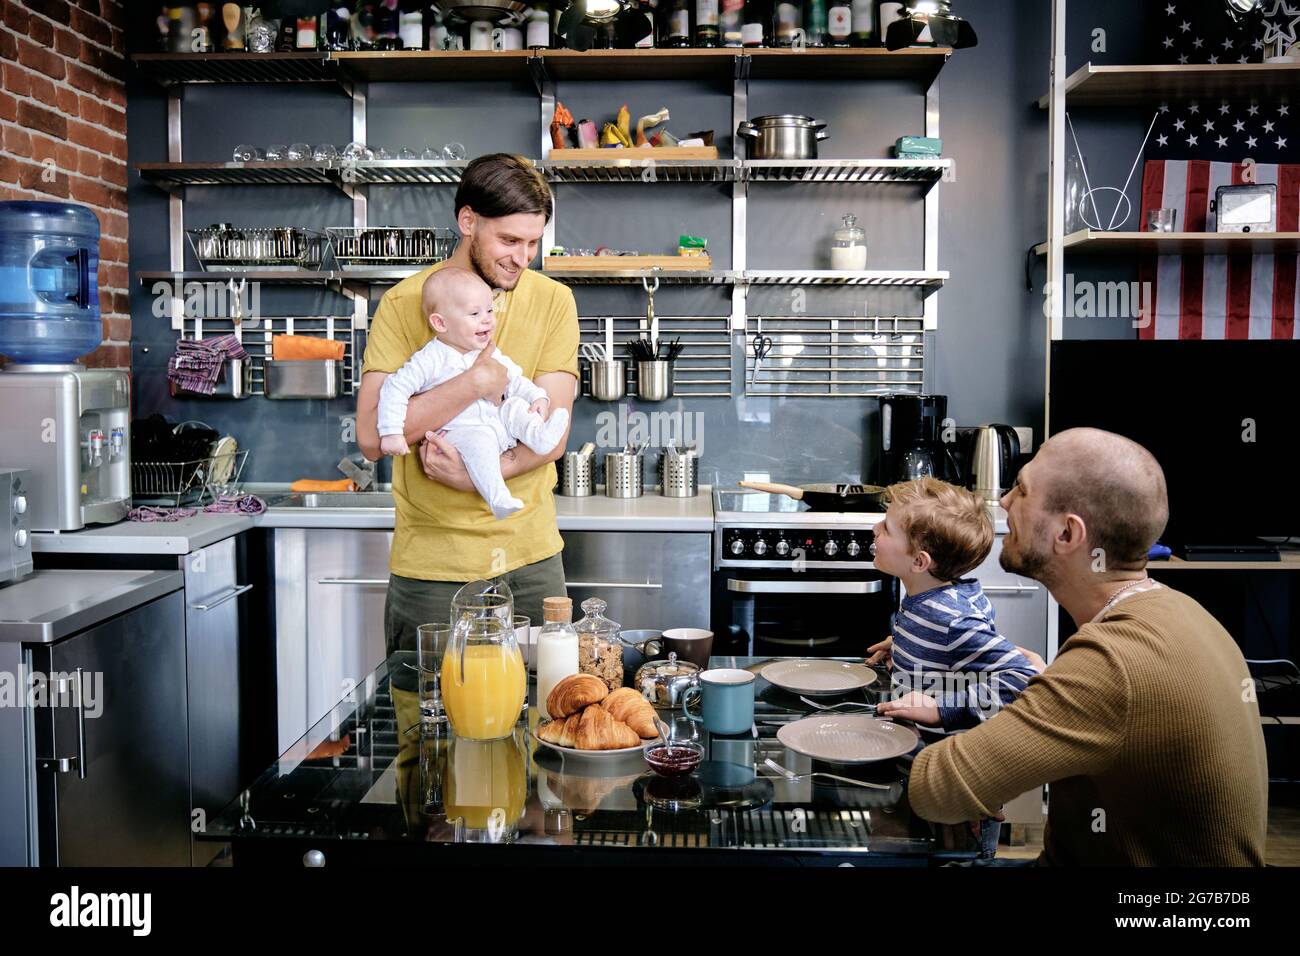 Happy smiling gay man introducing newborn baby to his older son at family breakfast Stock Photo